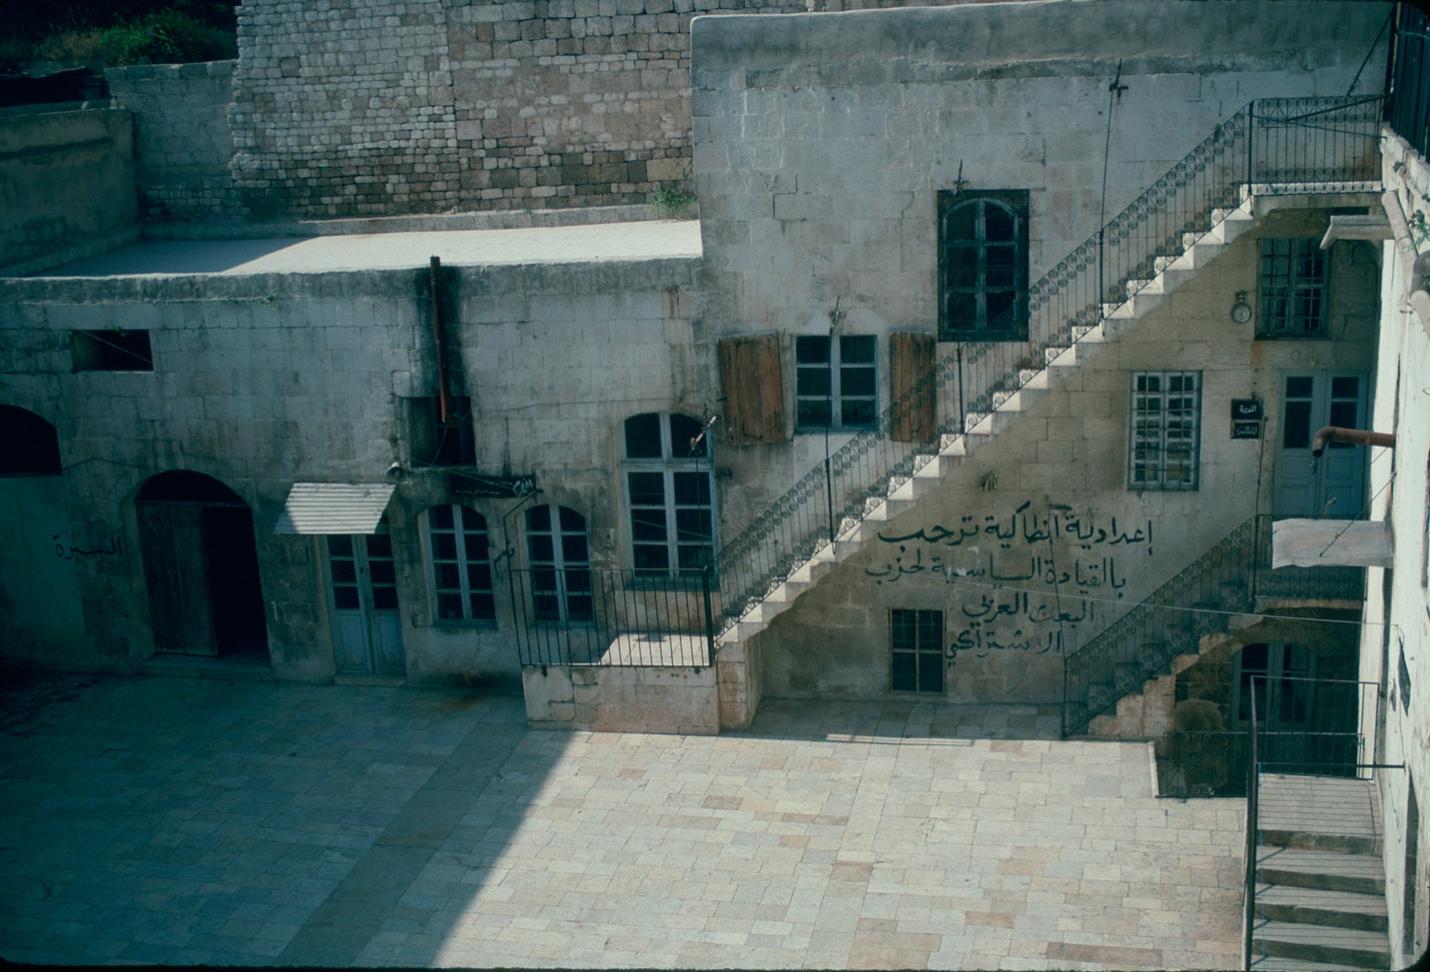 Courtyard view of northern façade